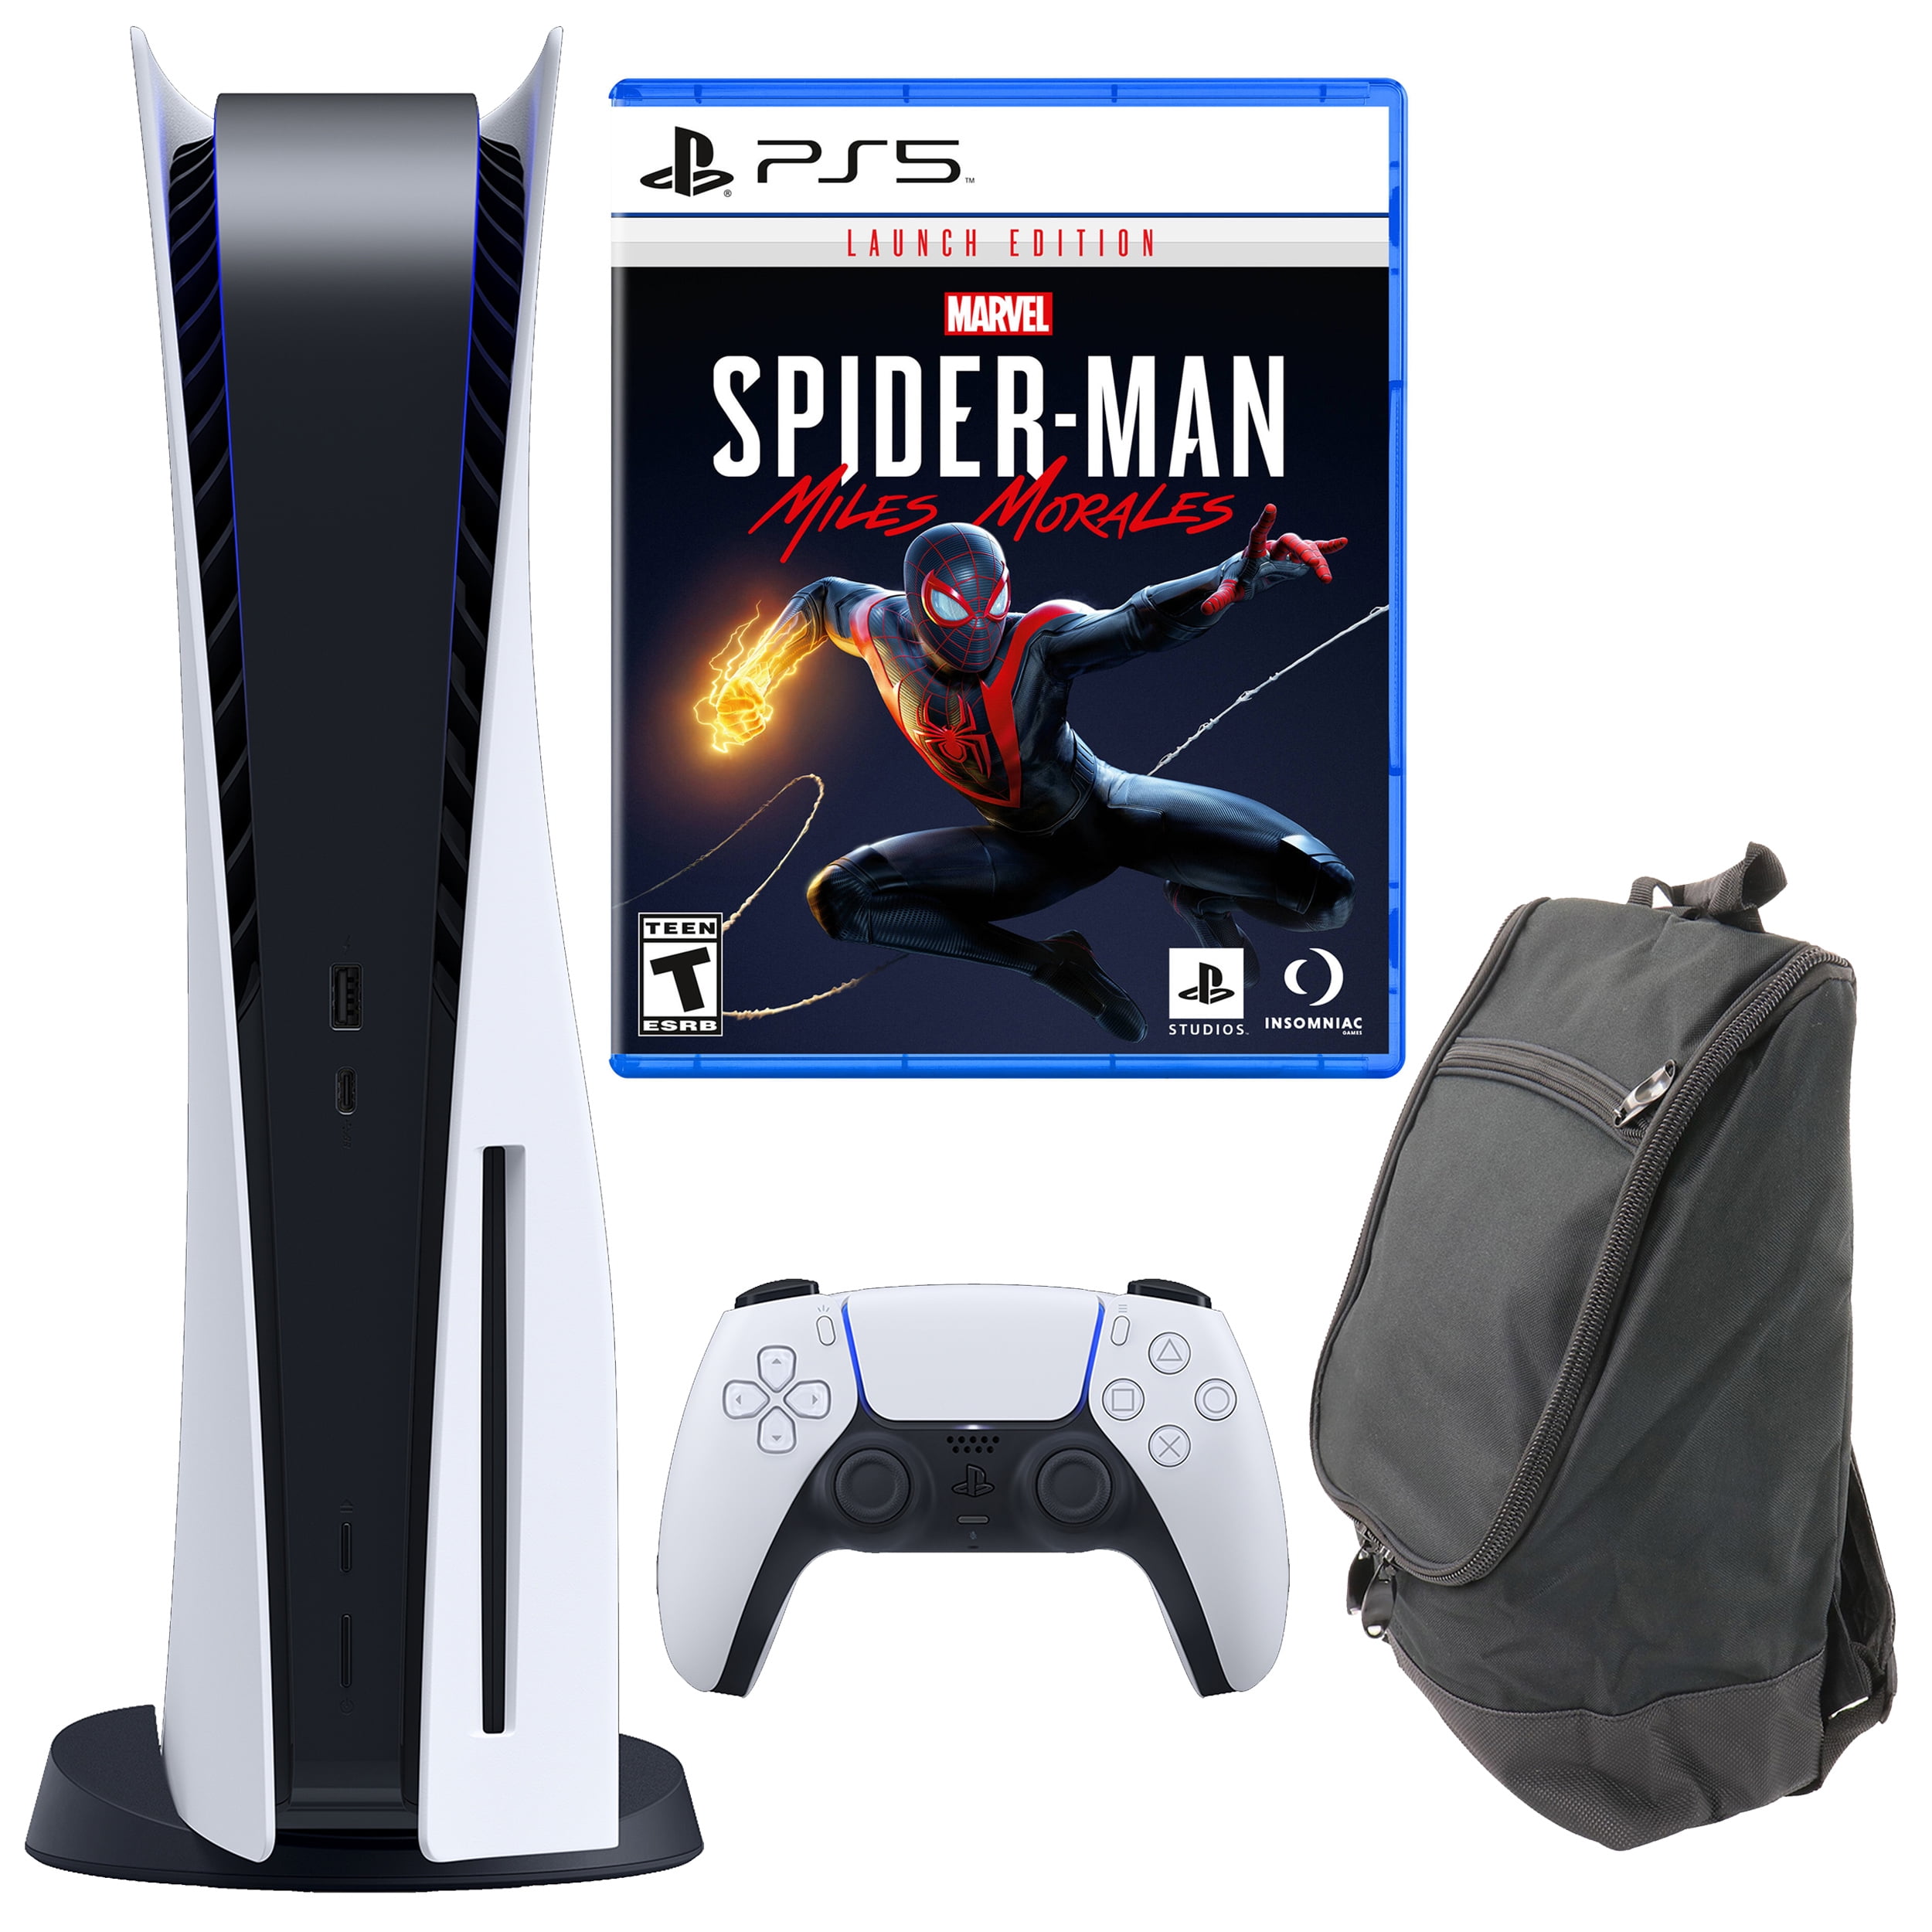 TEC Sony PlayStation_PS5 Gaming Console(Disc Version) with Spiderman Miles  Morales Game Bundle, PlayStation - 5 